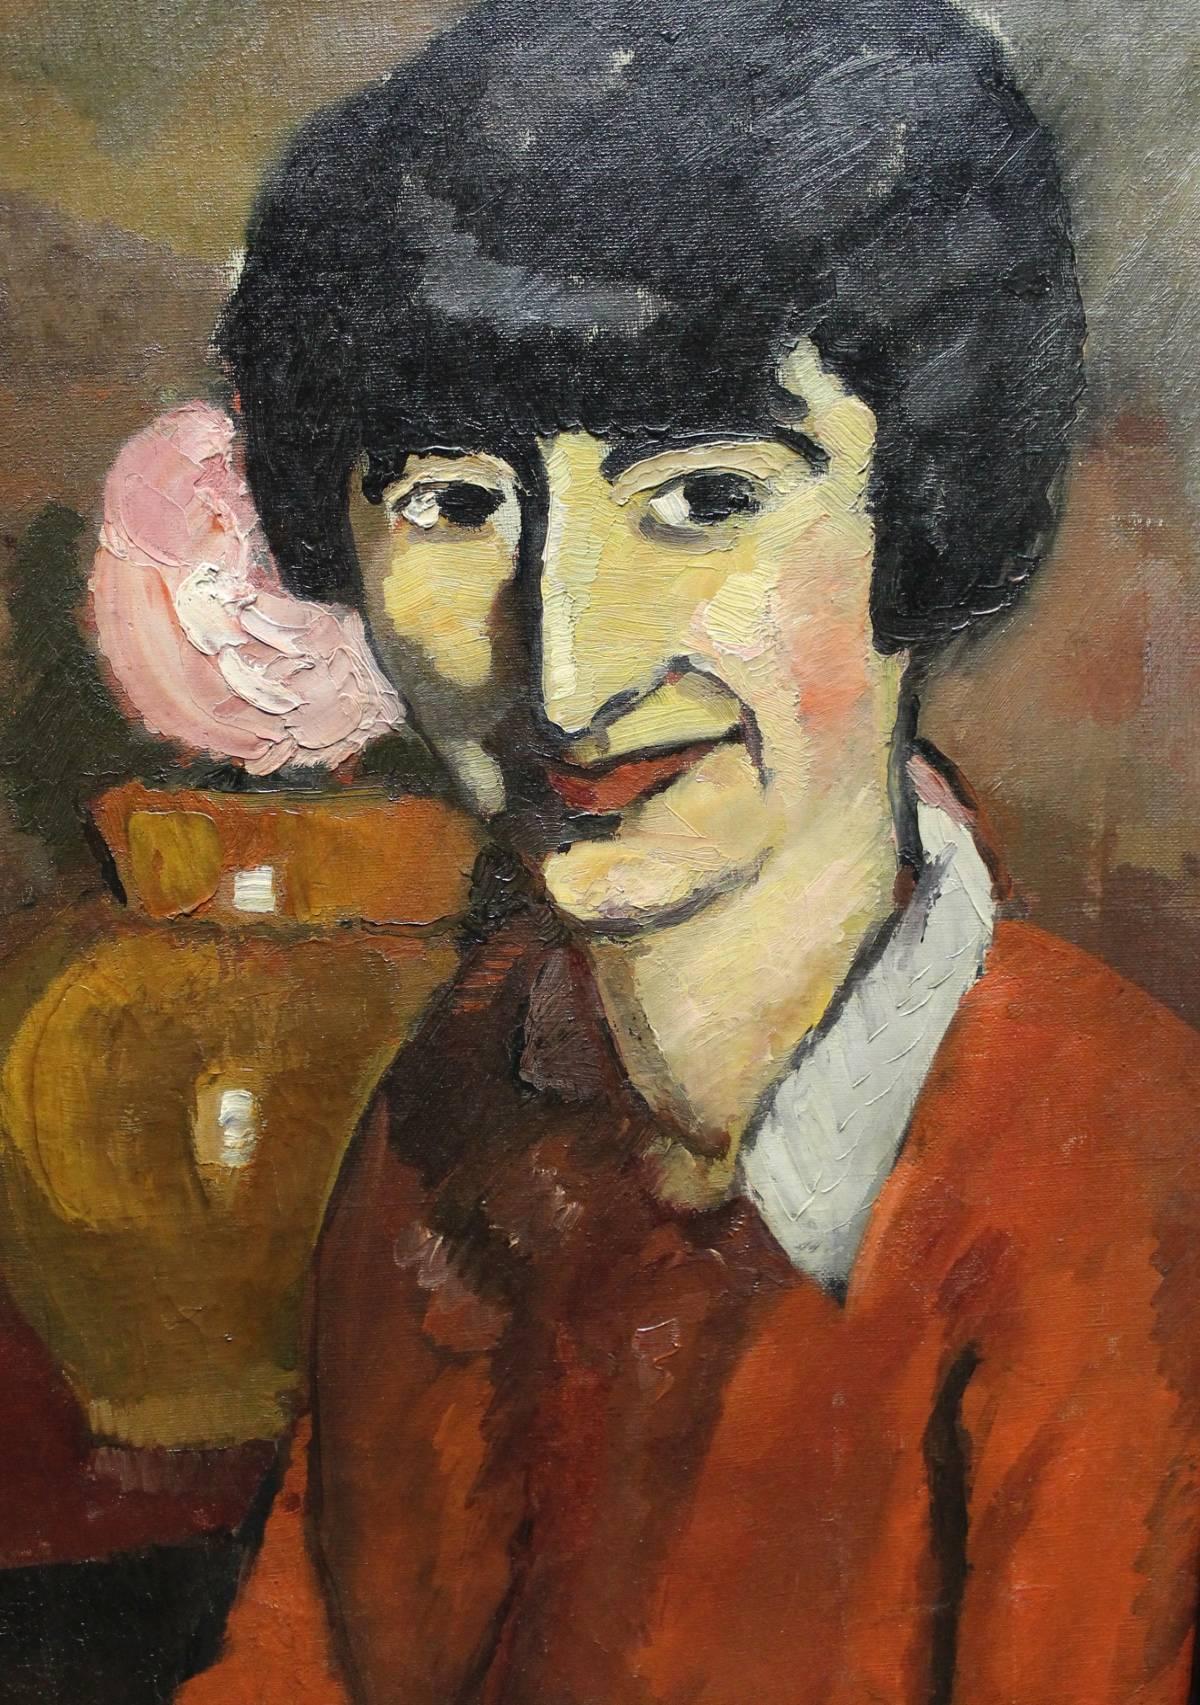  Alice B. Toklas, 1926 - Expressionist Painting by Harald Zaki